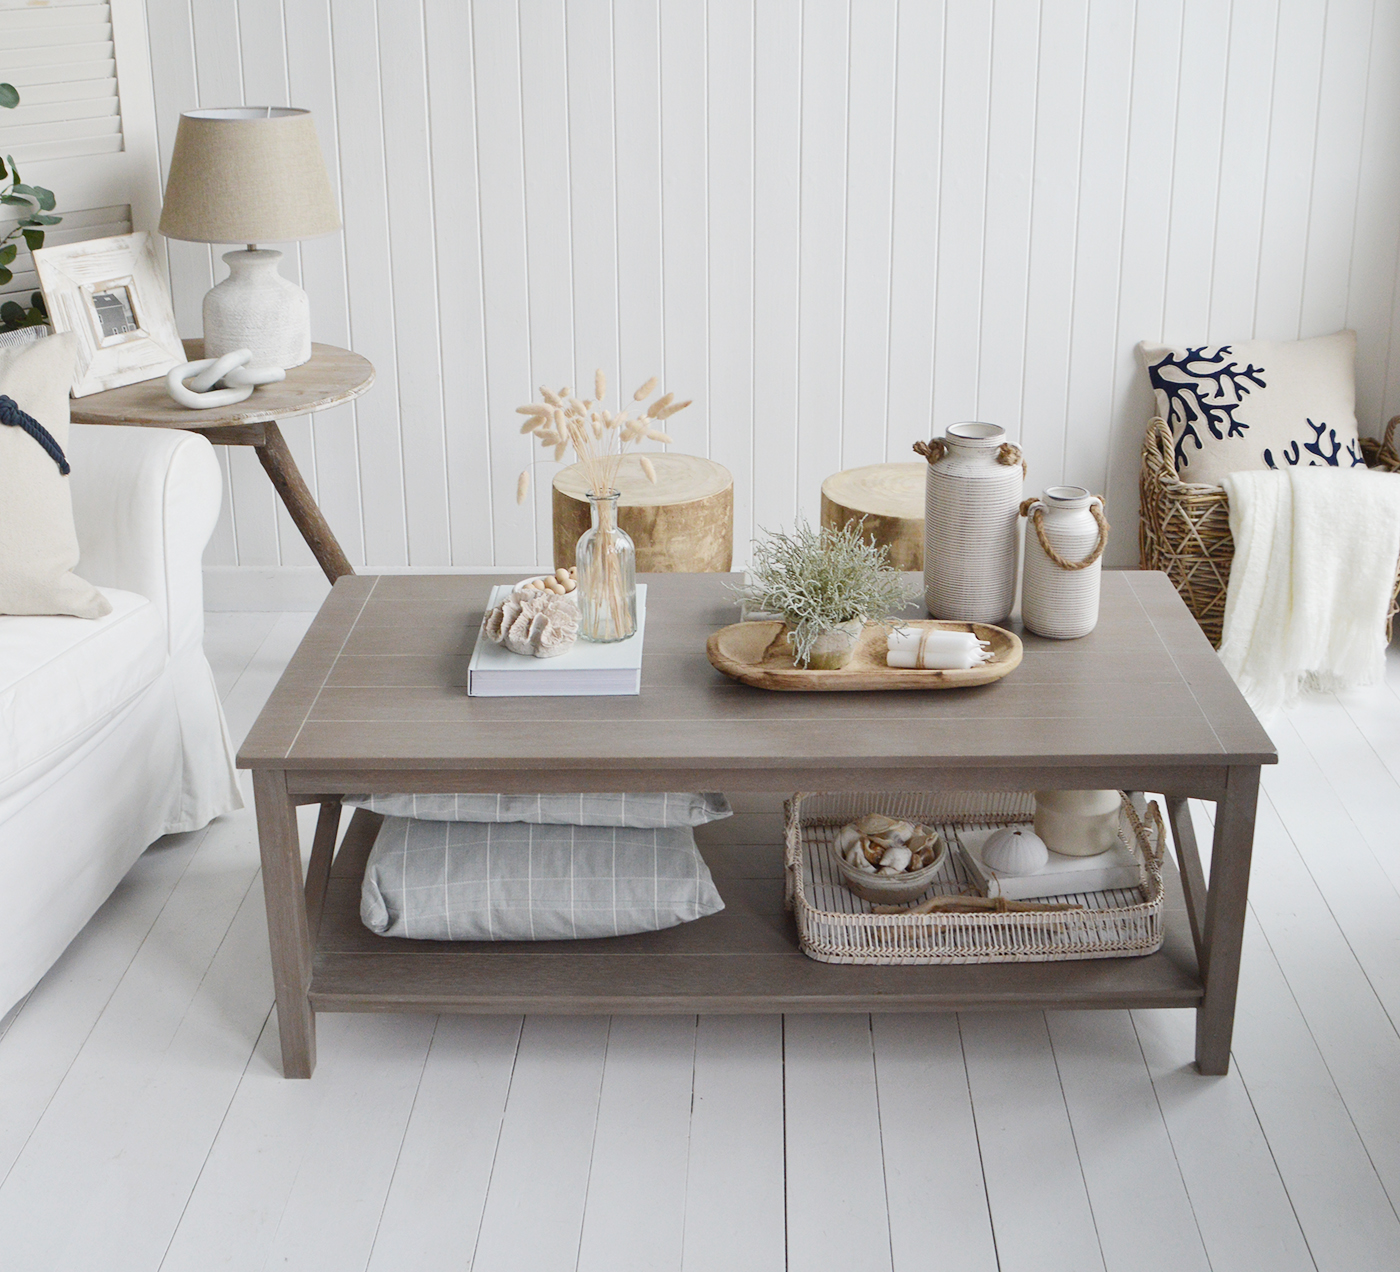 Hamtons chic coastal furniture - The Cambridge Coffee Table shown with the Ascot wooden stools and ideas on coffee table styling and decor